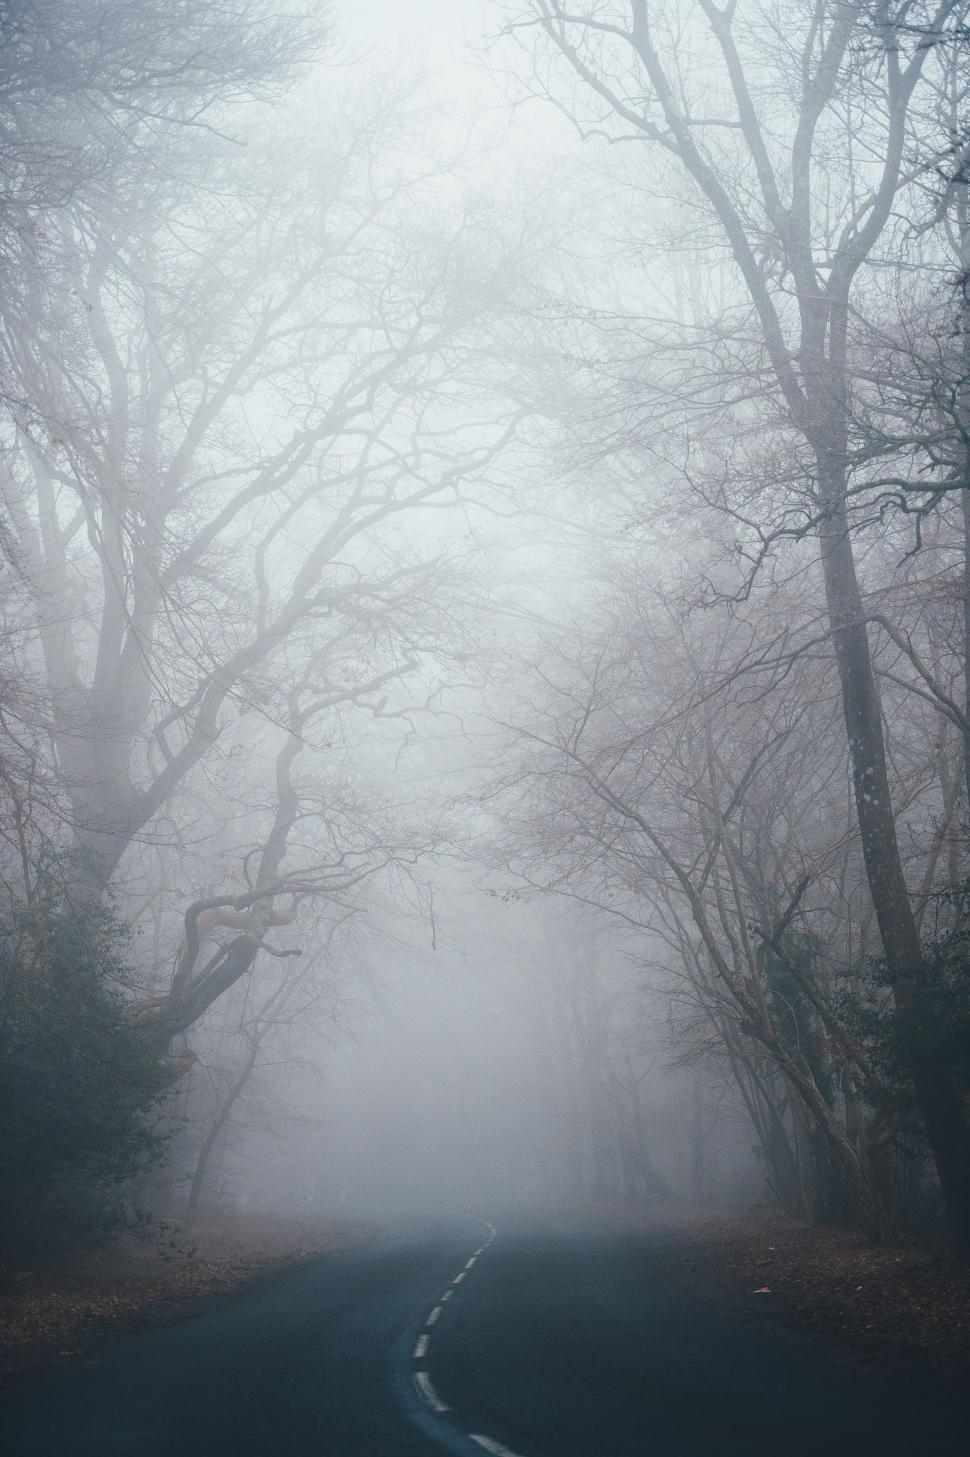 Free Image of Misty Road Through Dense Forest 